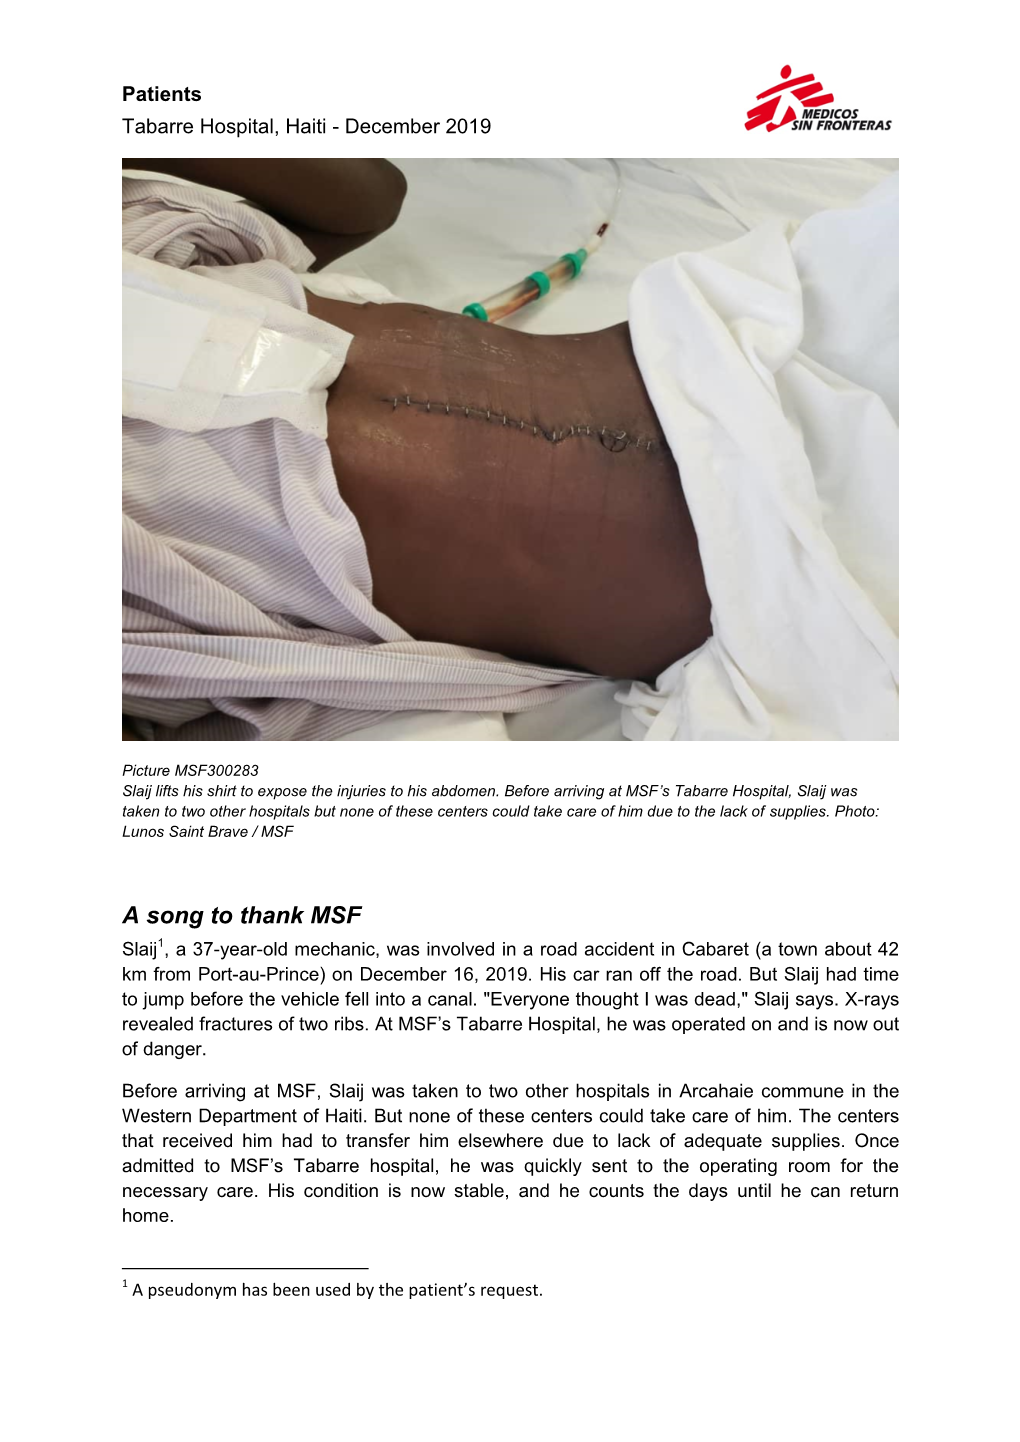 A Song to Thank MSF Slaij1, a 37-Year-Old Mechanic, Was Involved in a Road Accident in Cabaret (A Town About 42 Km from Port-Au-Prince) on December 16, 2019